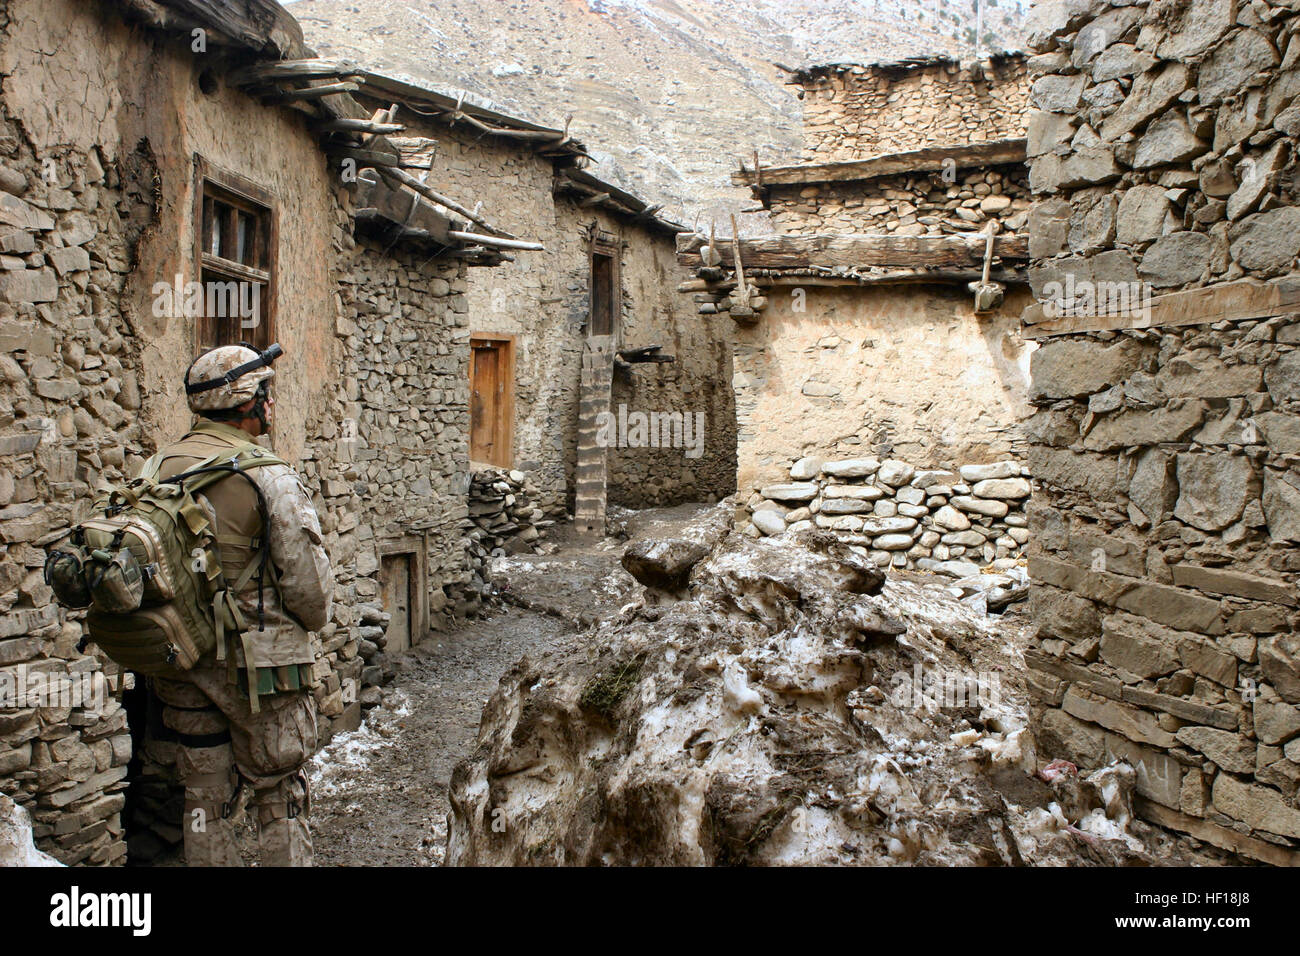 Petty Officer 2nd Class Alonzo Gonzales, a Hospital Corpman with Kilo Company, 3rd Battalion, 3rd Marine Regiment, walks through an alley looking for signs of sickness or disease during Operation Mavericks, an operation that Marines conducted to capture suspected Anti Coaltion Forces in the vicinity of Methar Lam, Afghanistan on March 19, 2005. 3rd Battalion, 3rd Marines is conducting security and stabilization operations in support of Operation Enduring Freedom. (U.S. Marine Corps photo by Corporal James L. Yarboro) Released 3rd Battalion, 3rd Marines - Afghanistan Stock Photo